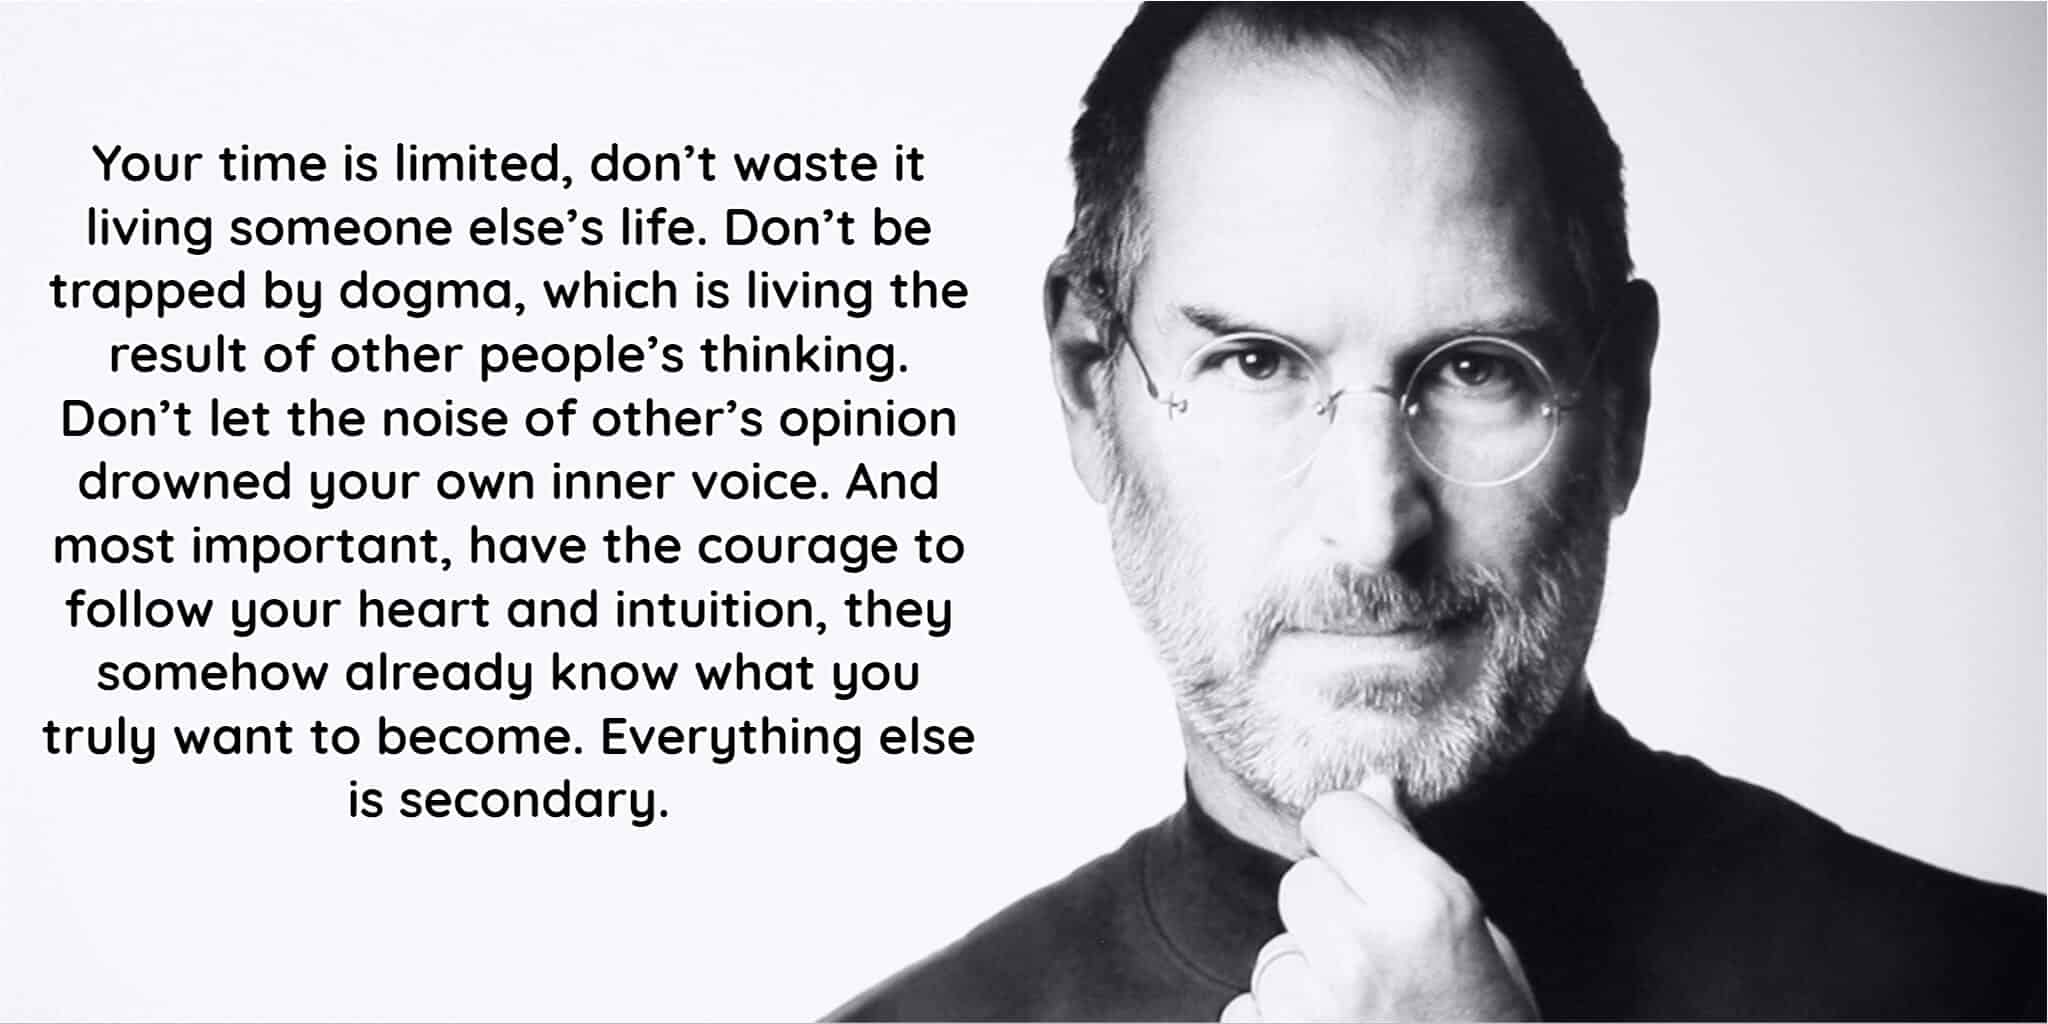 A famous quote by Steve Jobs